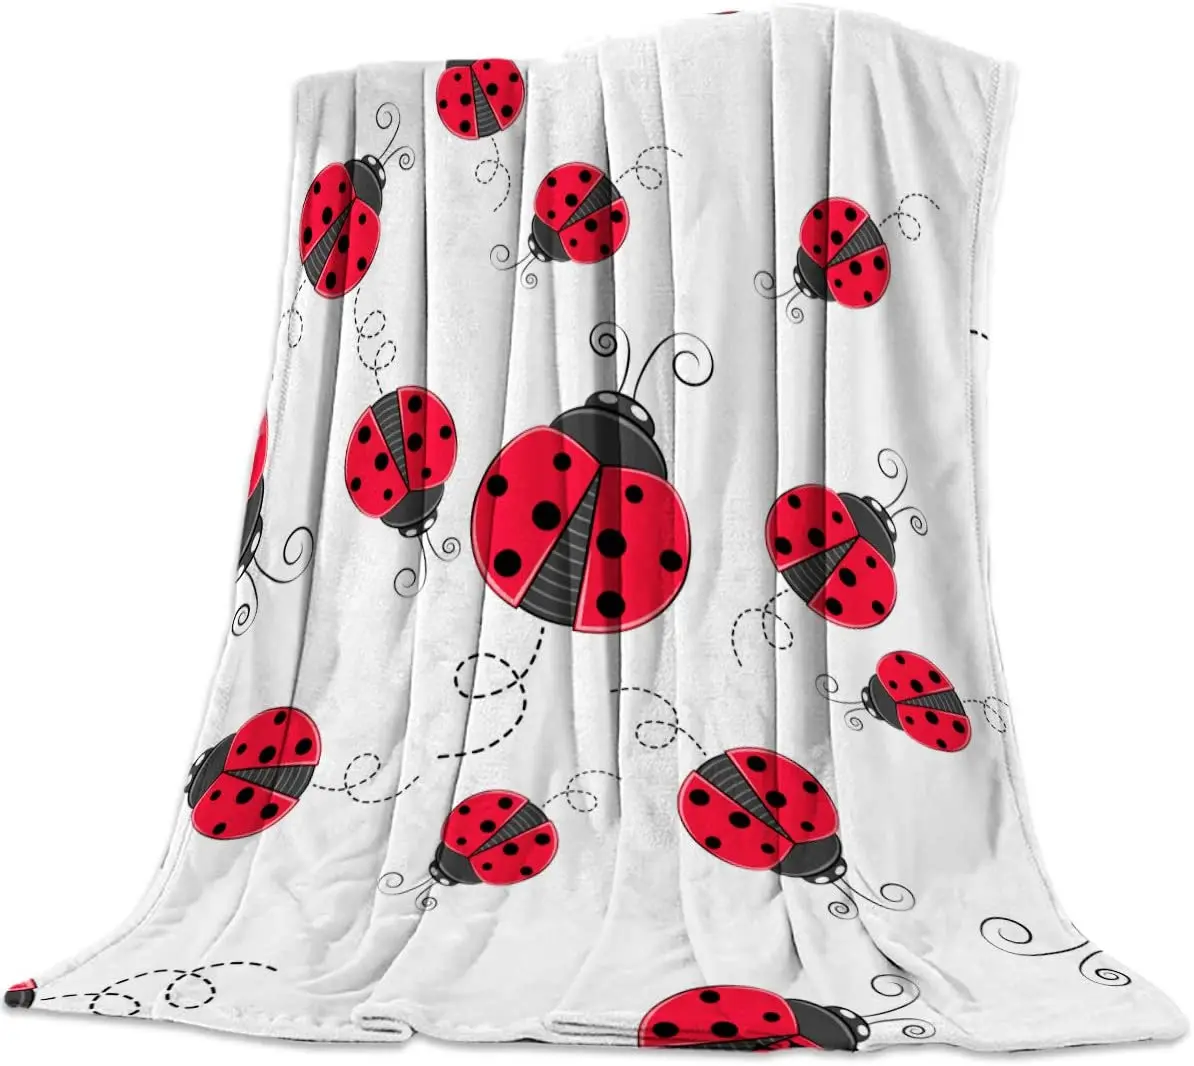 

Flannel Fleece Blanket Christmas Red Ladybug Super Soft Warm Cozy Bed Couch Car Throw Blanket for Kids Adults Travel All Season